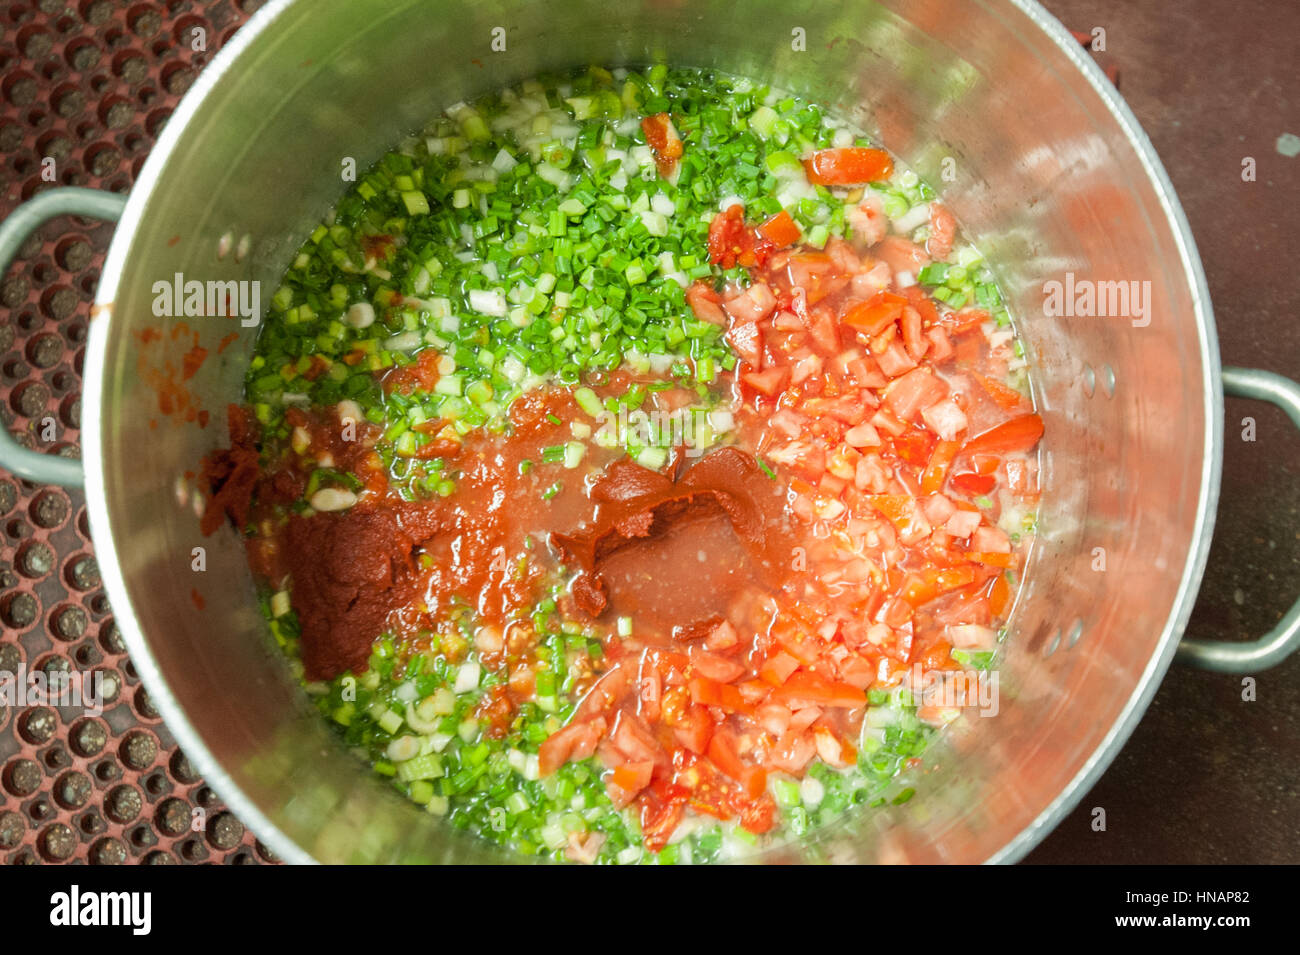 A pot full of tomatoes, spices, and other fresh greens is about to simmer at Gertrude's restaurant located in Baltimore, Maryland. Stock Photo